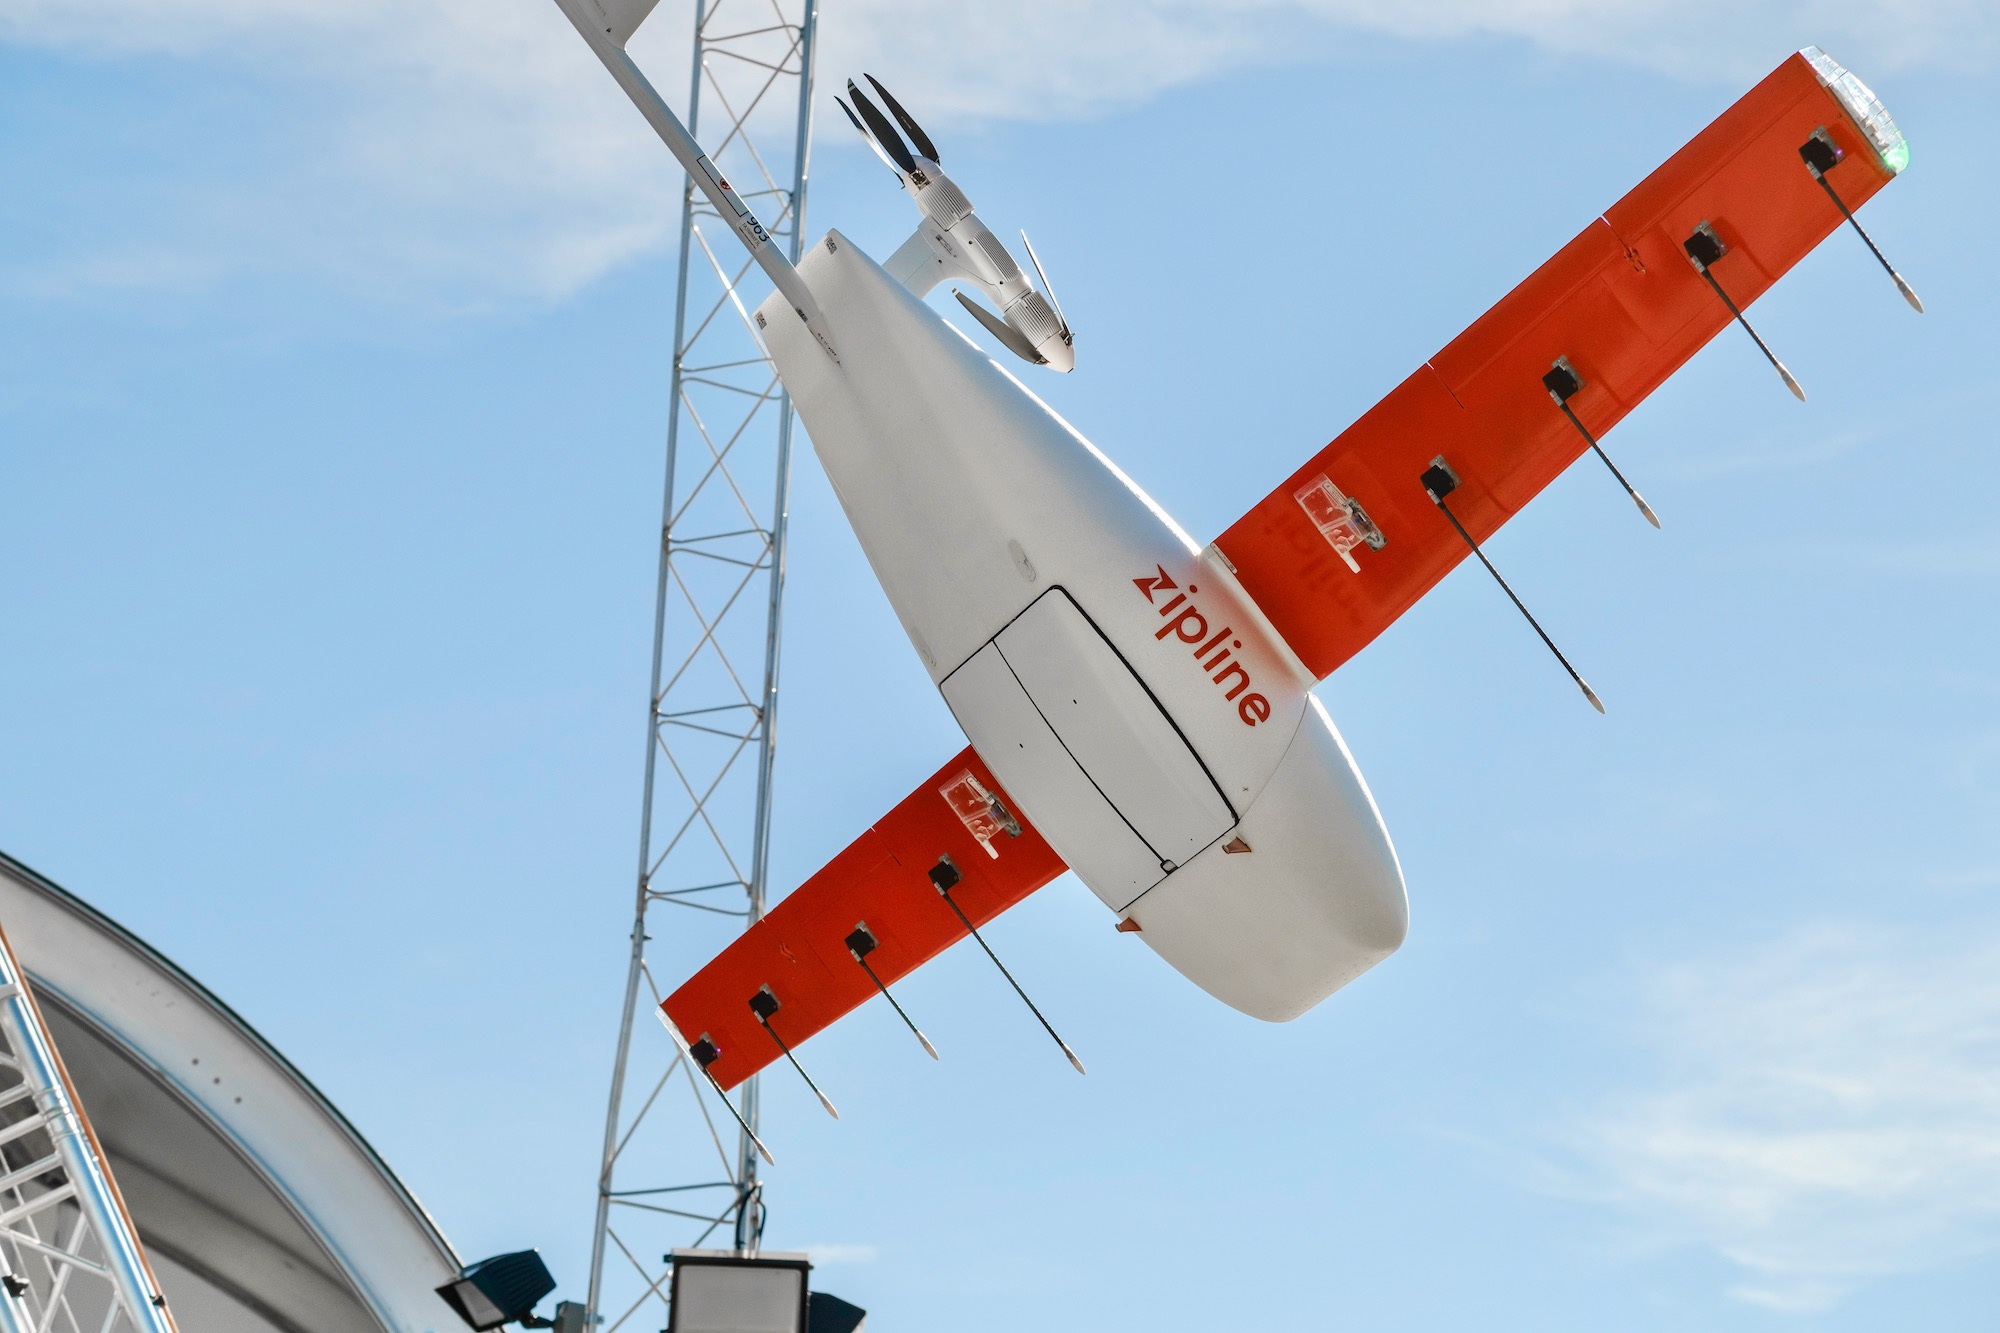 These drones can avoid midair collisions by listening for other aircraft